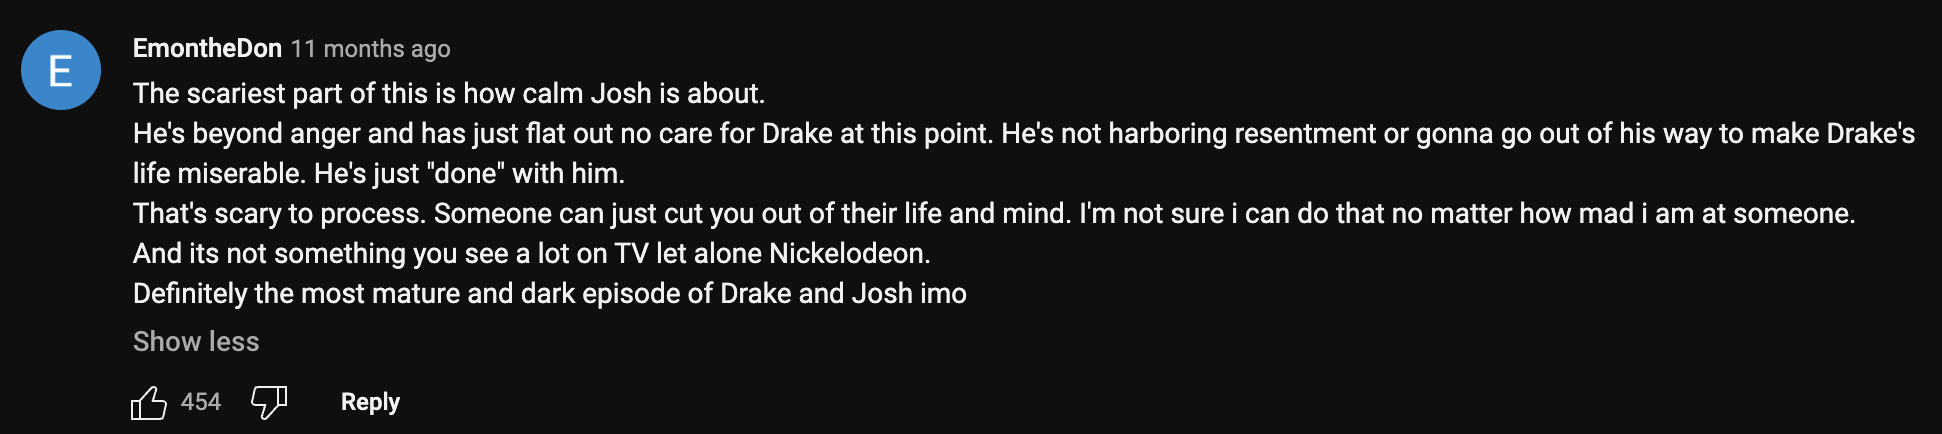 drake and josh yt comment.png